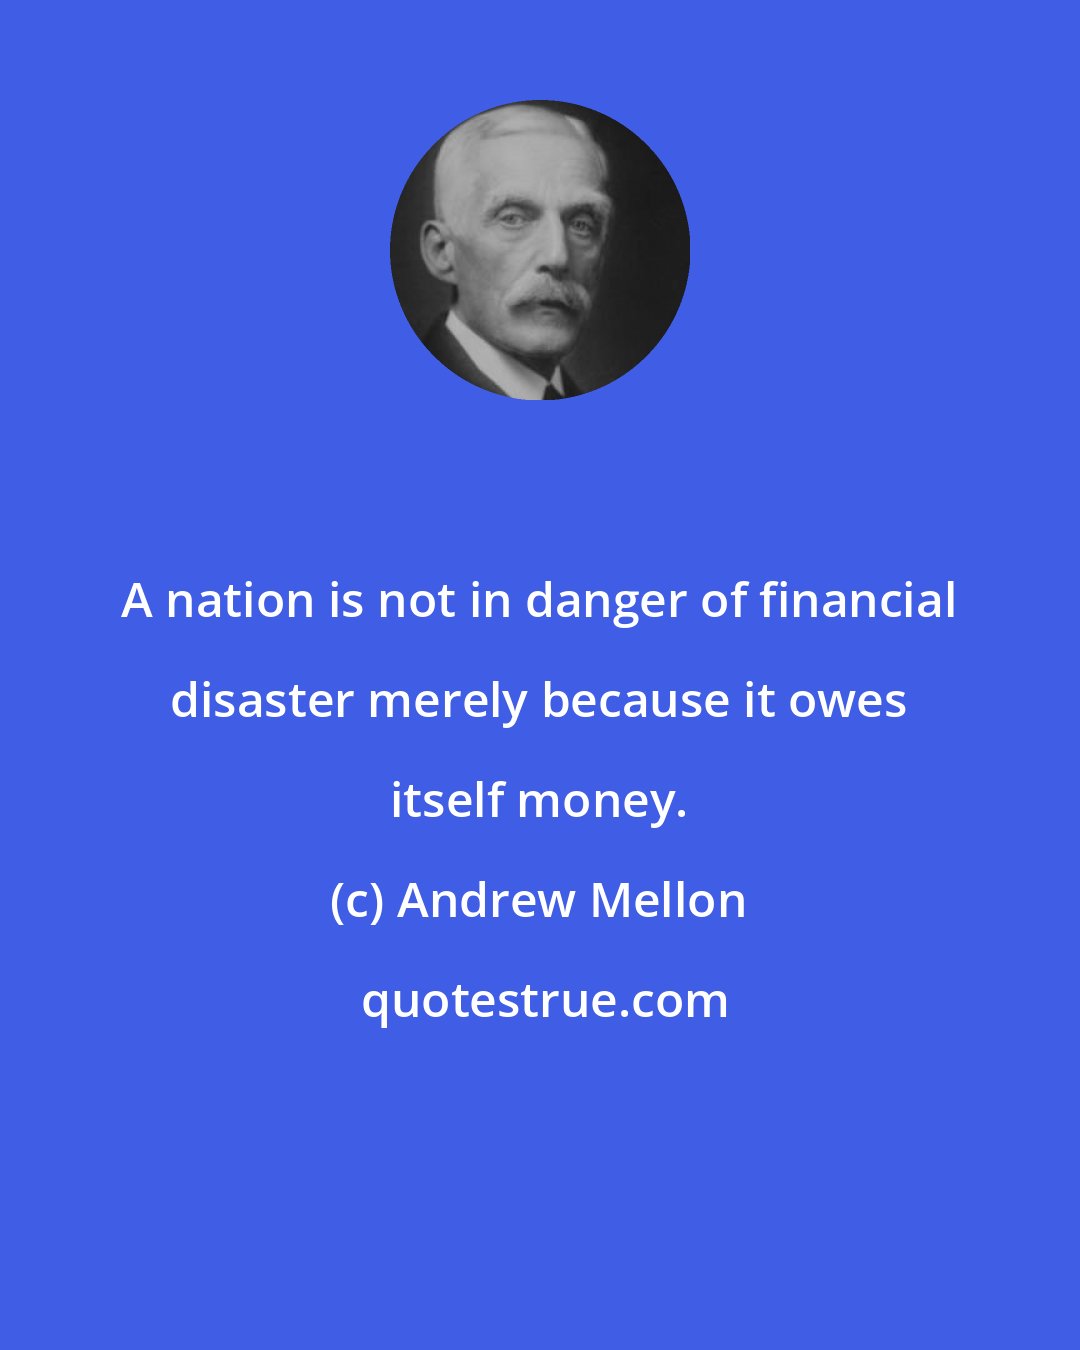 Andrew Mellon: A nation is not in danger of financial disaster merely because it owes itself money.